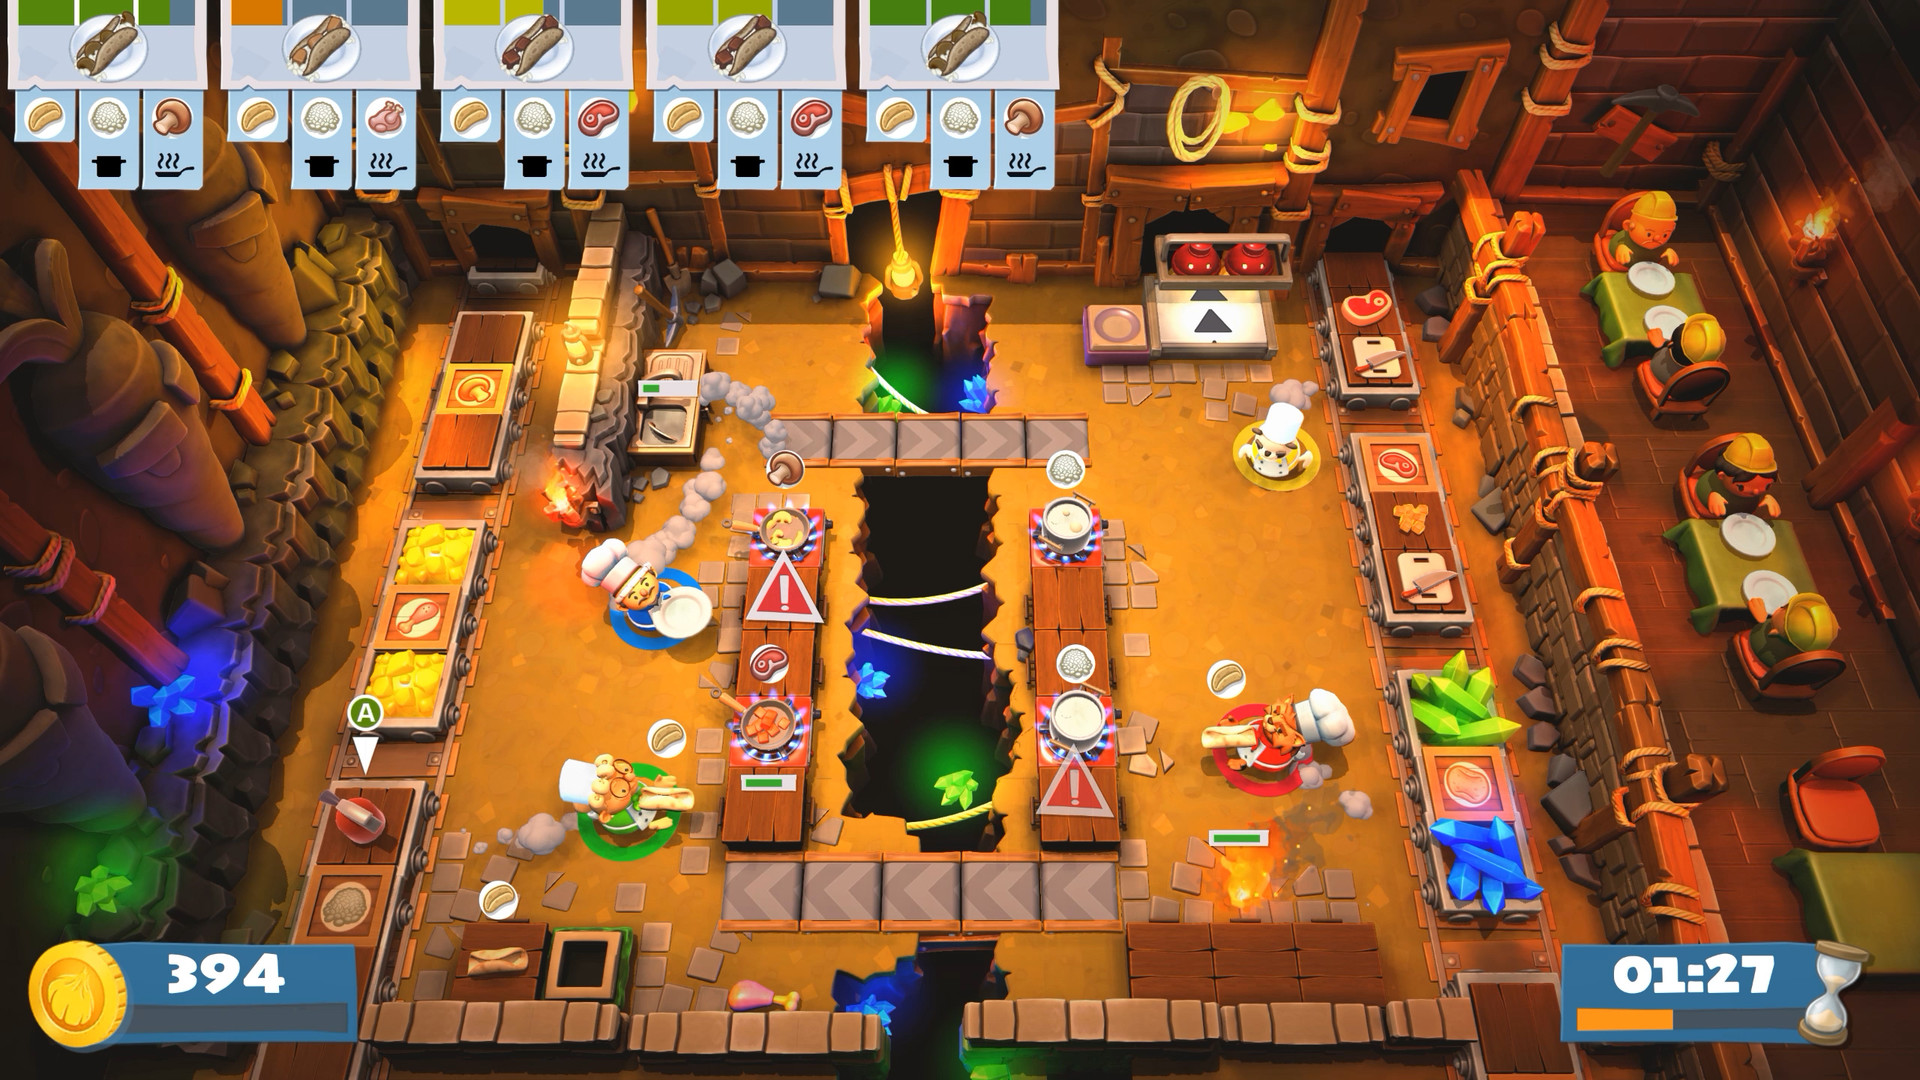 overcooked 4 player switch